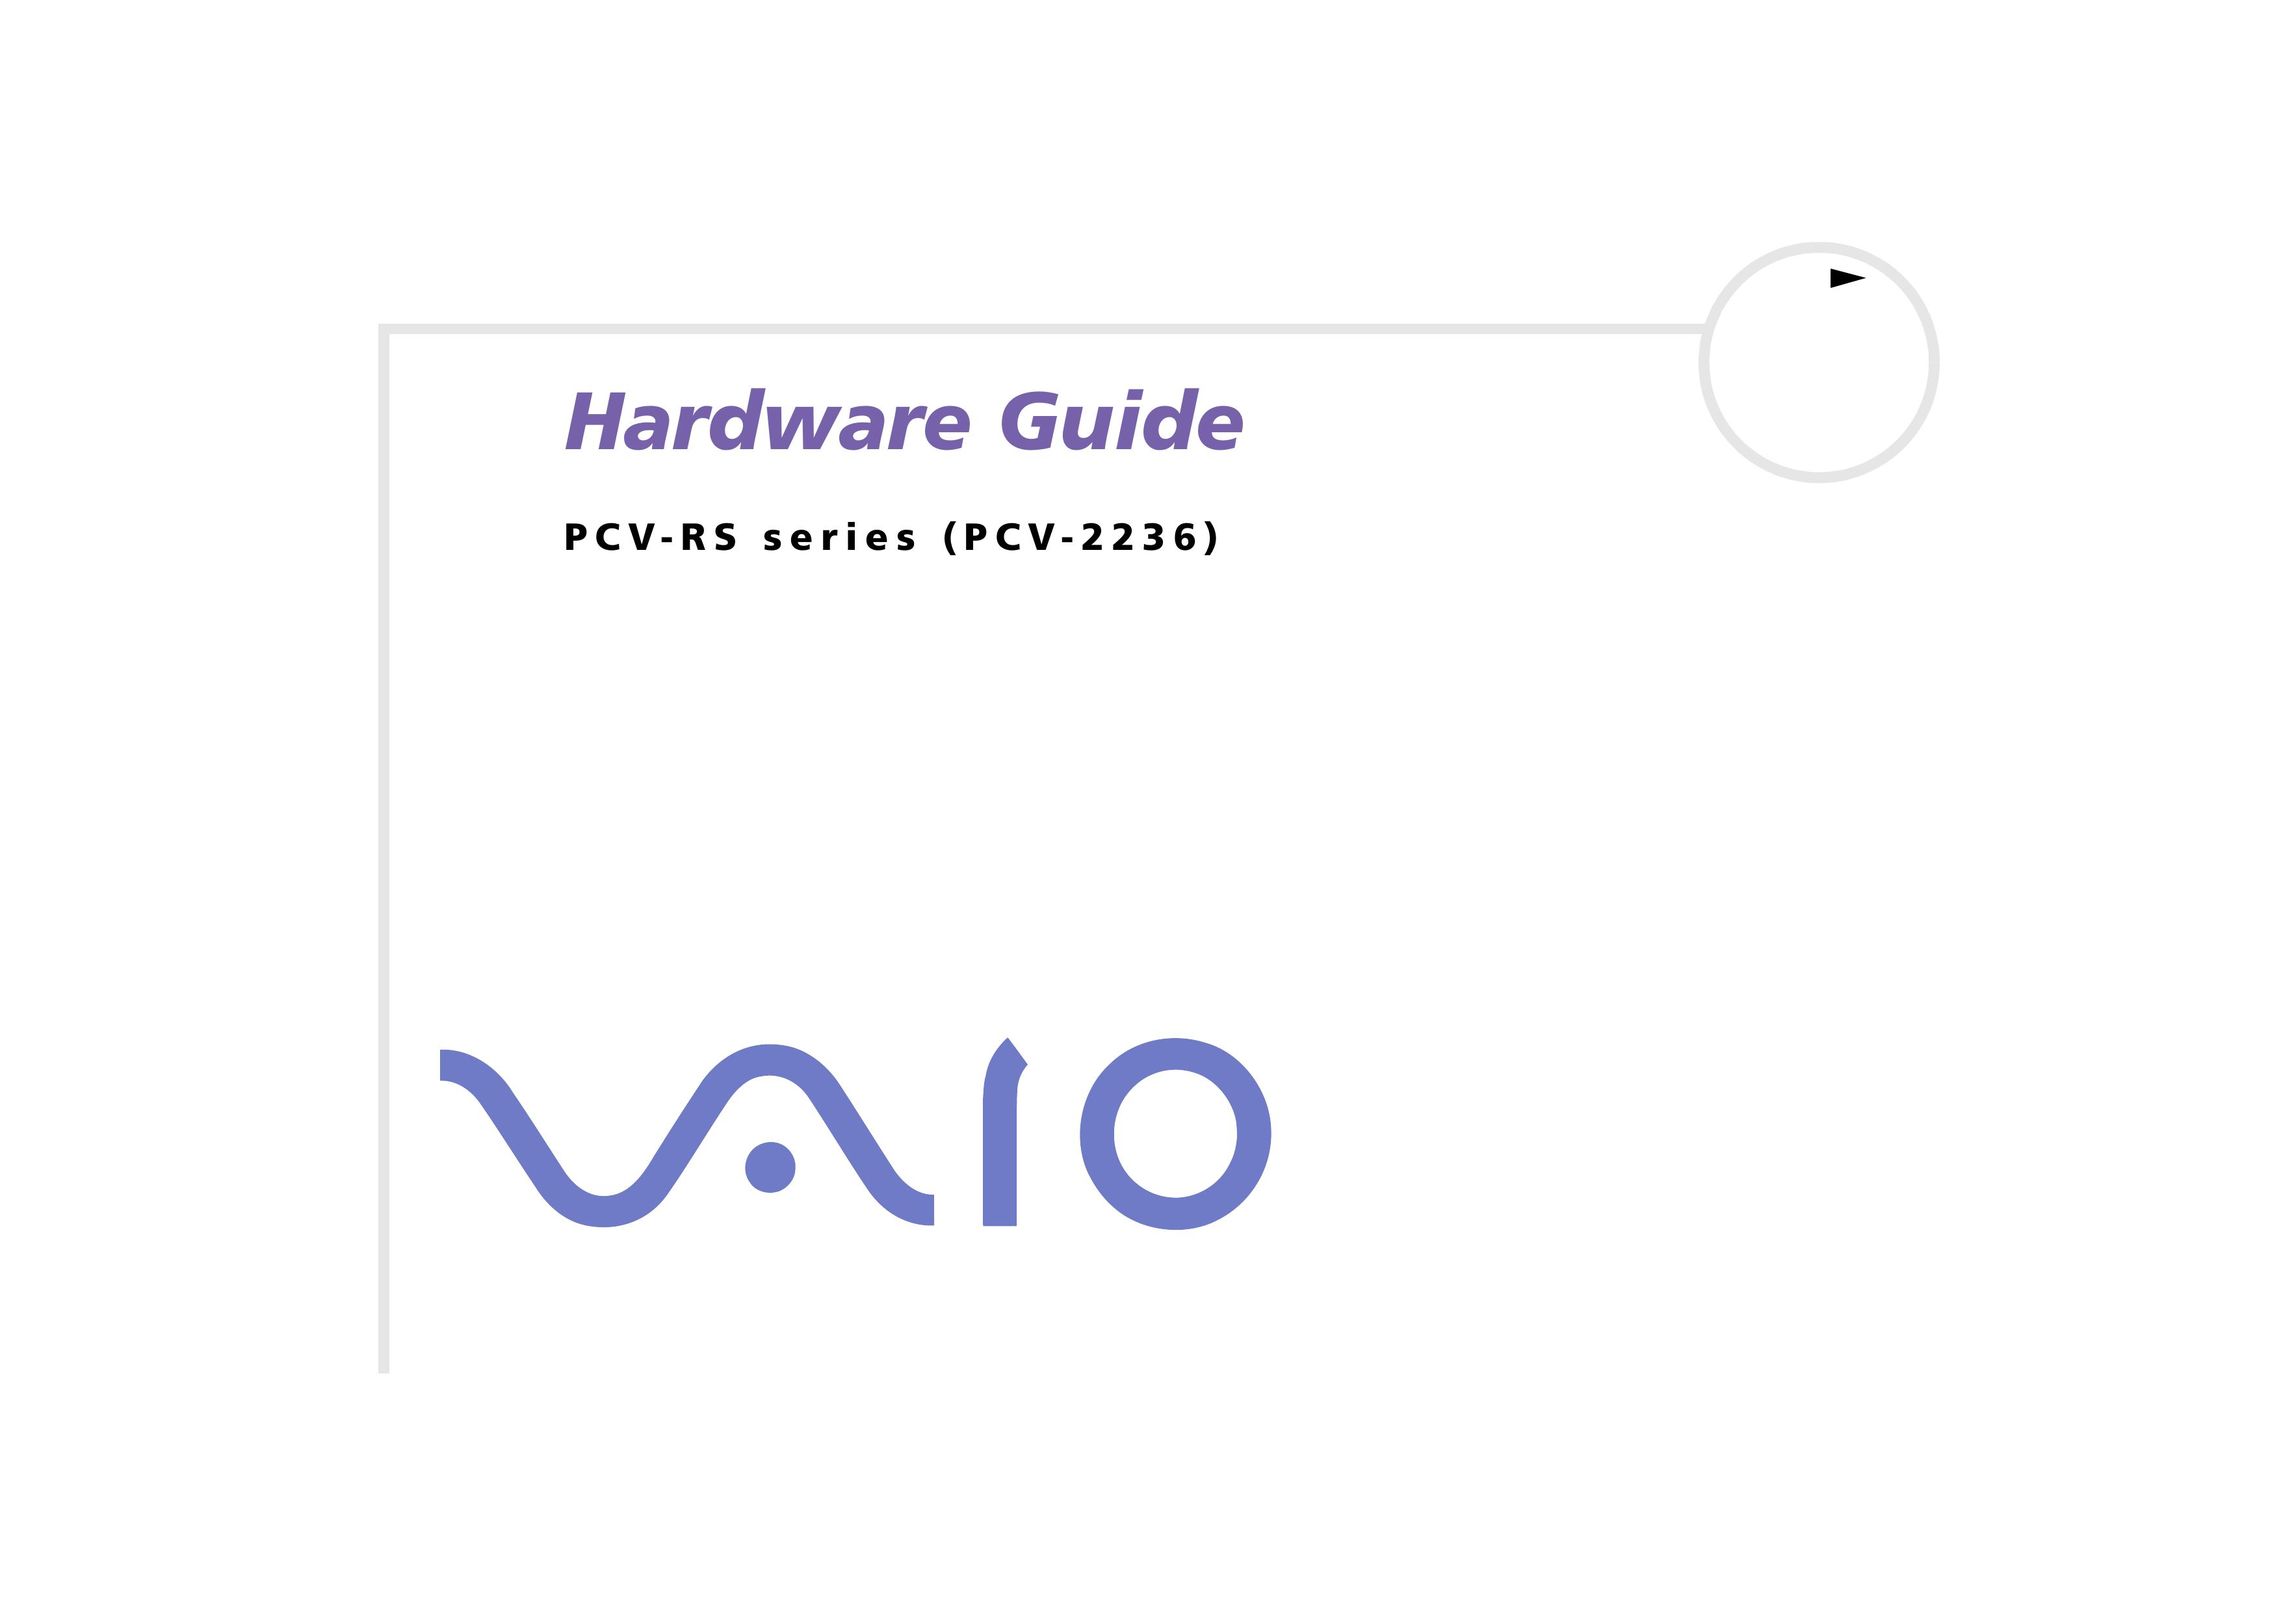 Sony PCV-2236 Personal Computer User Manual